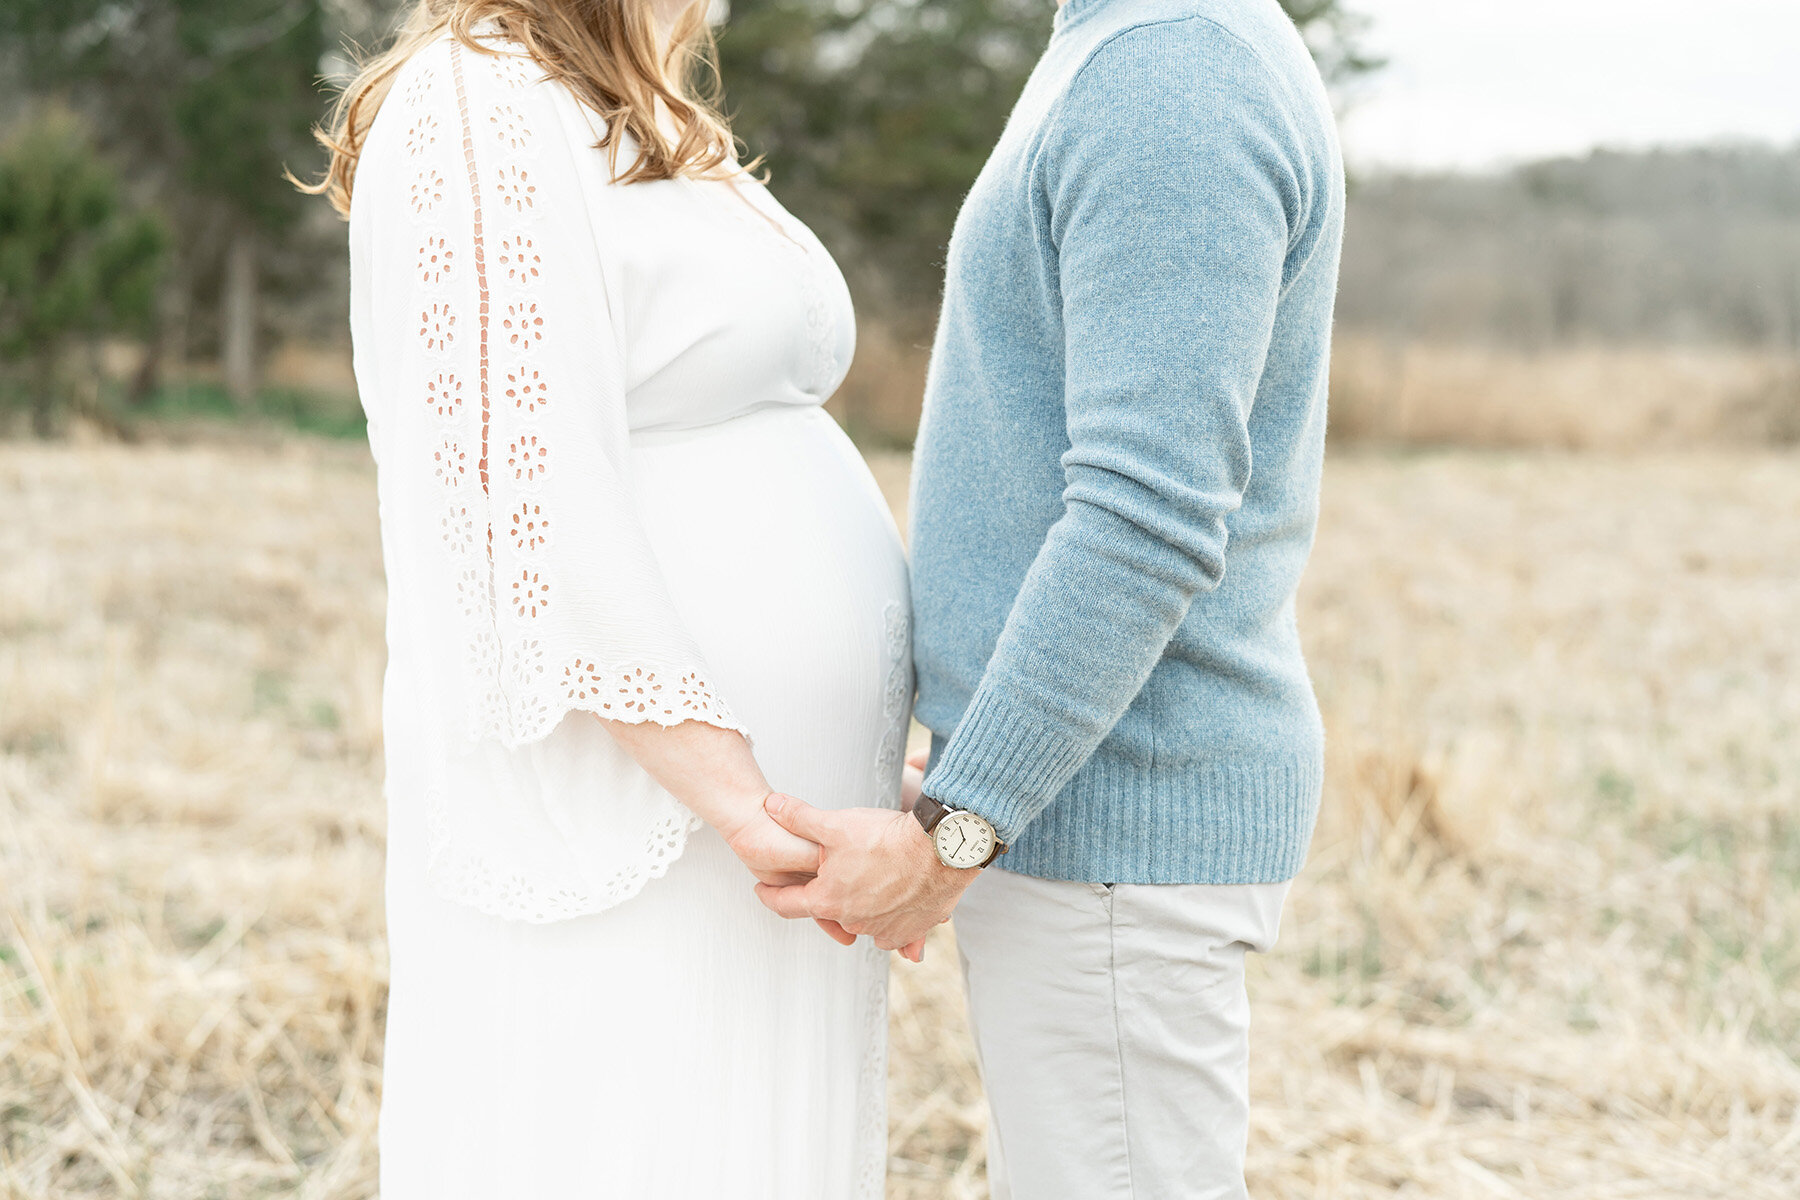 Expectant mother wears Fillyboo dress and holds her husband’s hands at this perfect outdoor location for maternity photos in Louisville KY